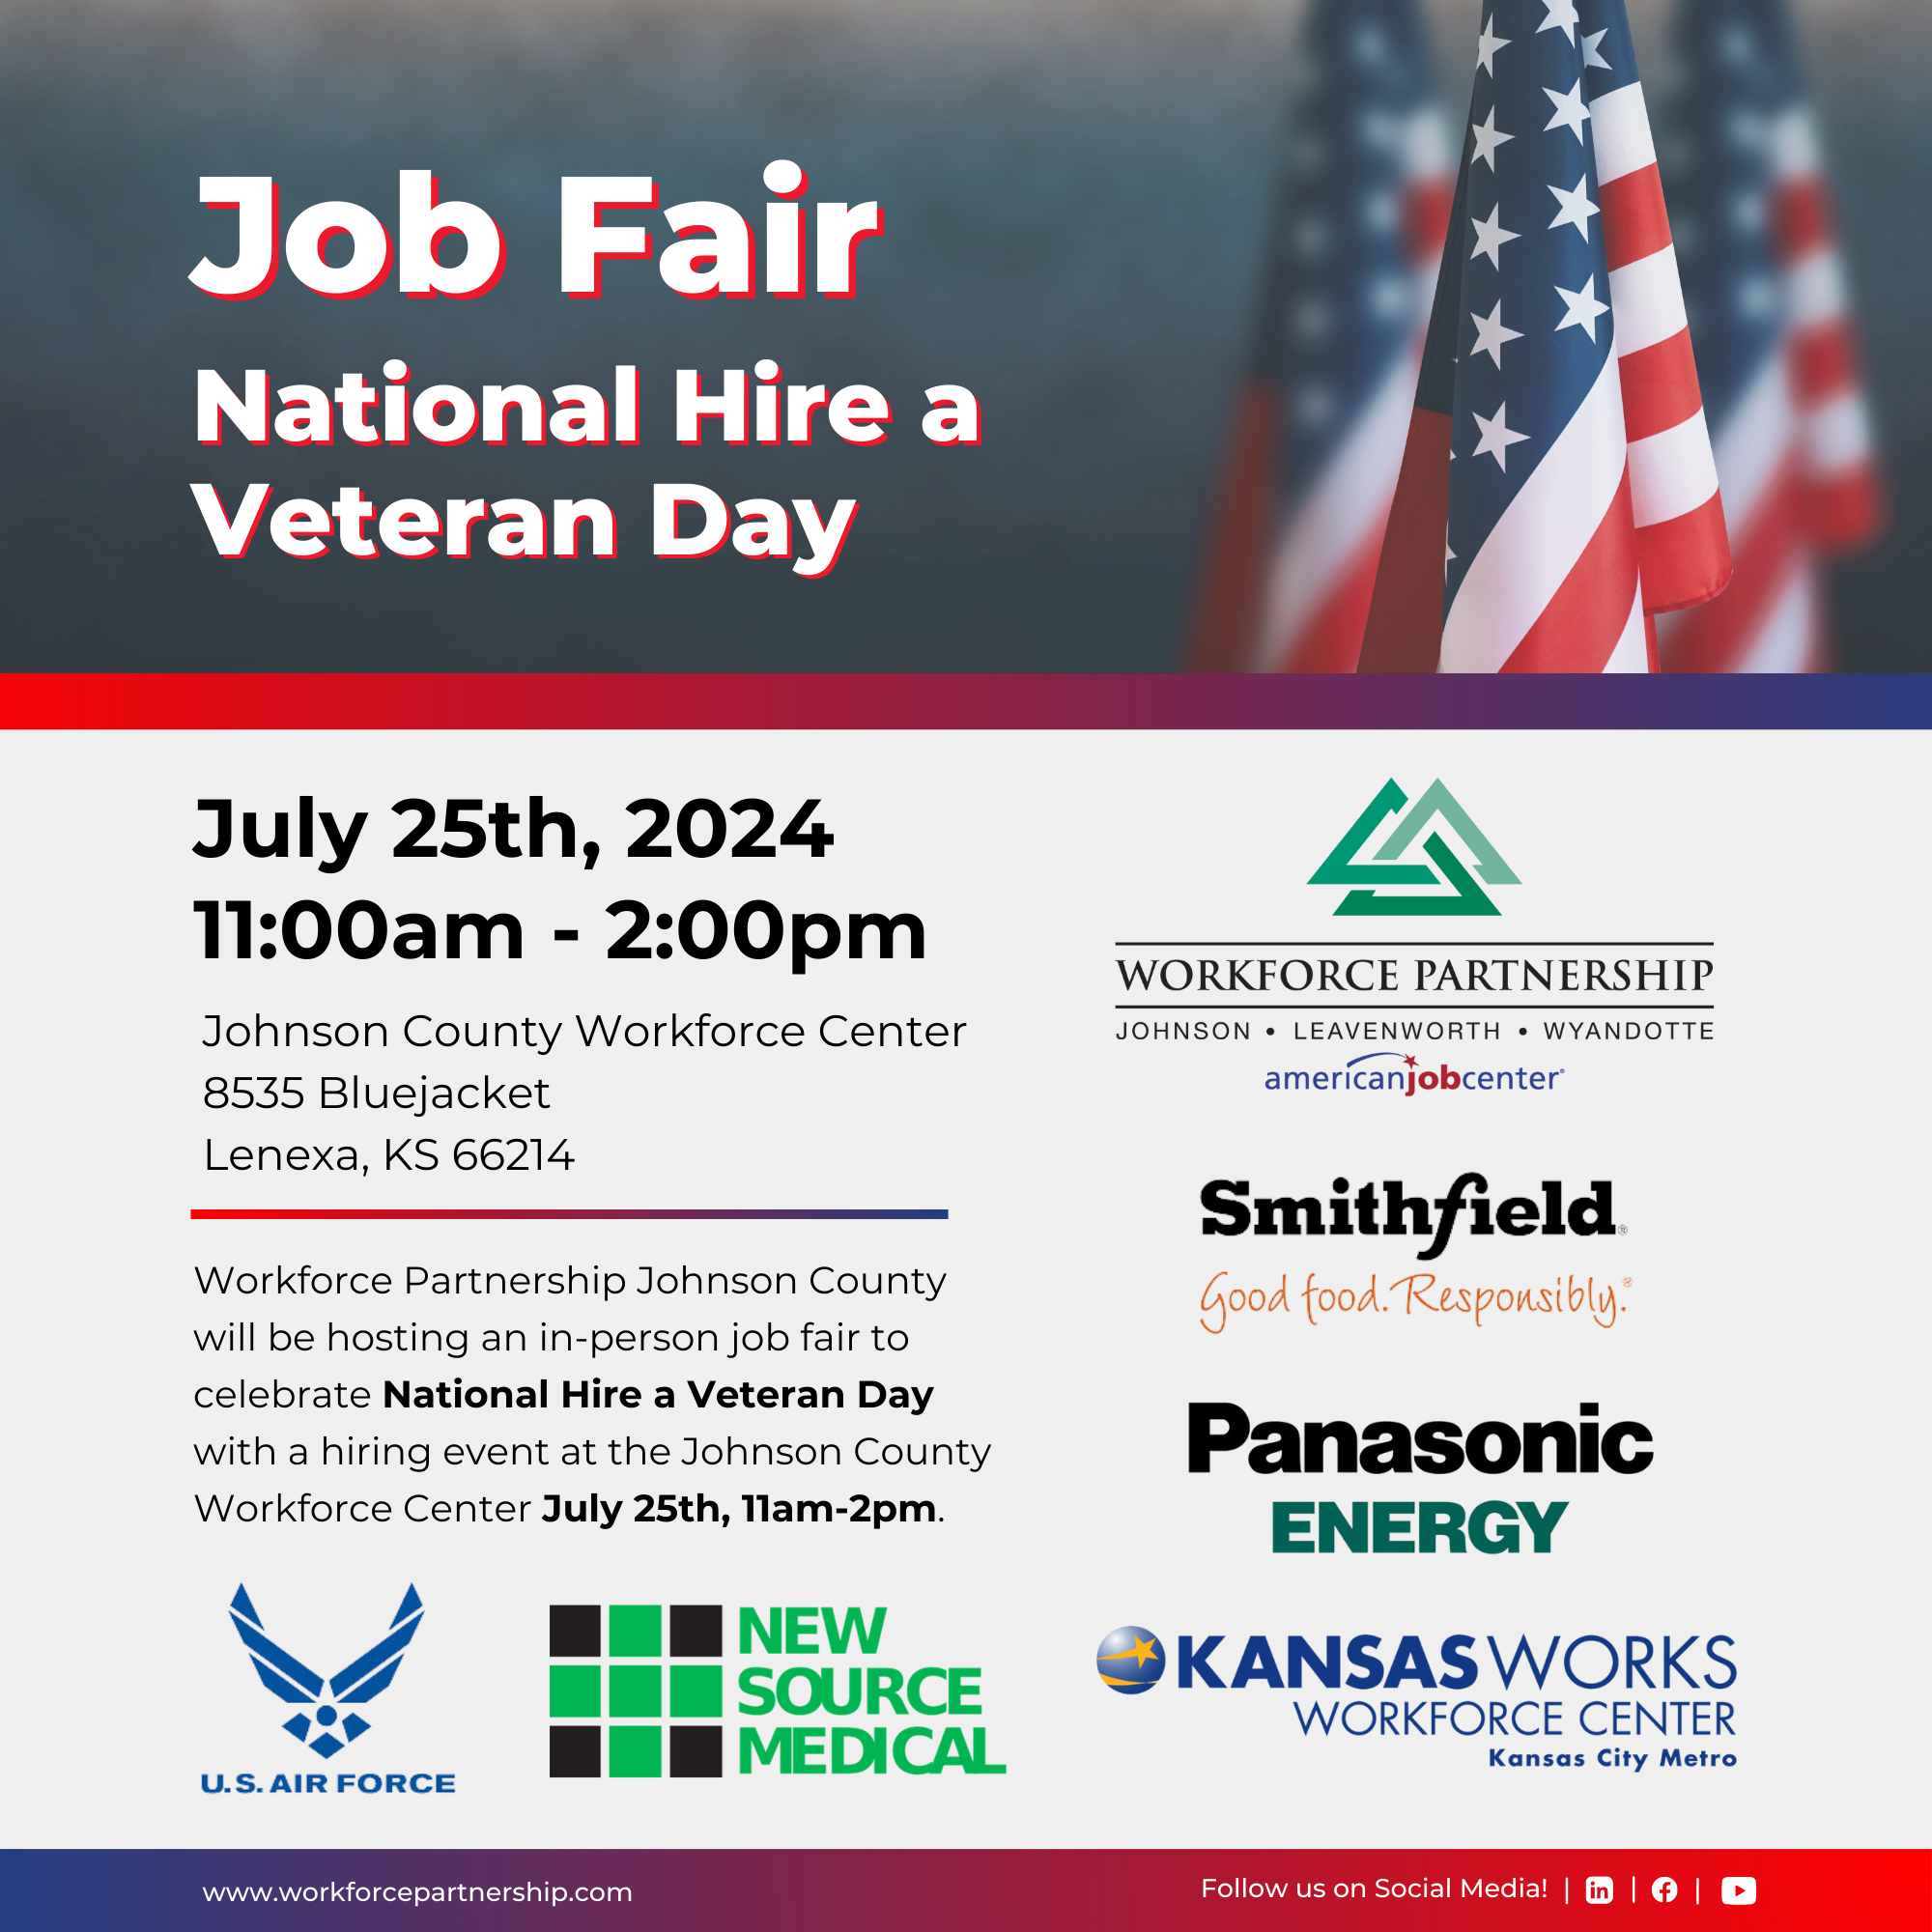 Join us at the National Hire A Veteran Day Job Fair on Thursday, July 25th, at the Johnson County Workforce Center!